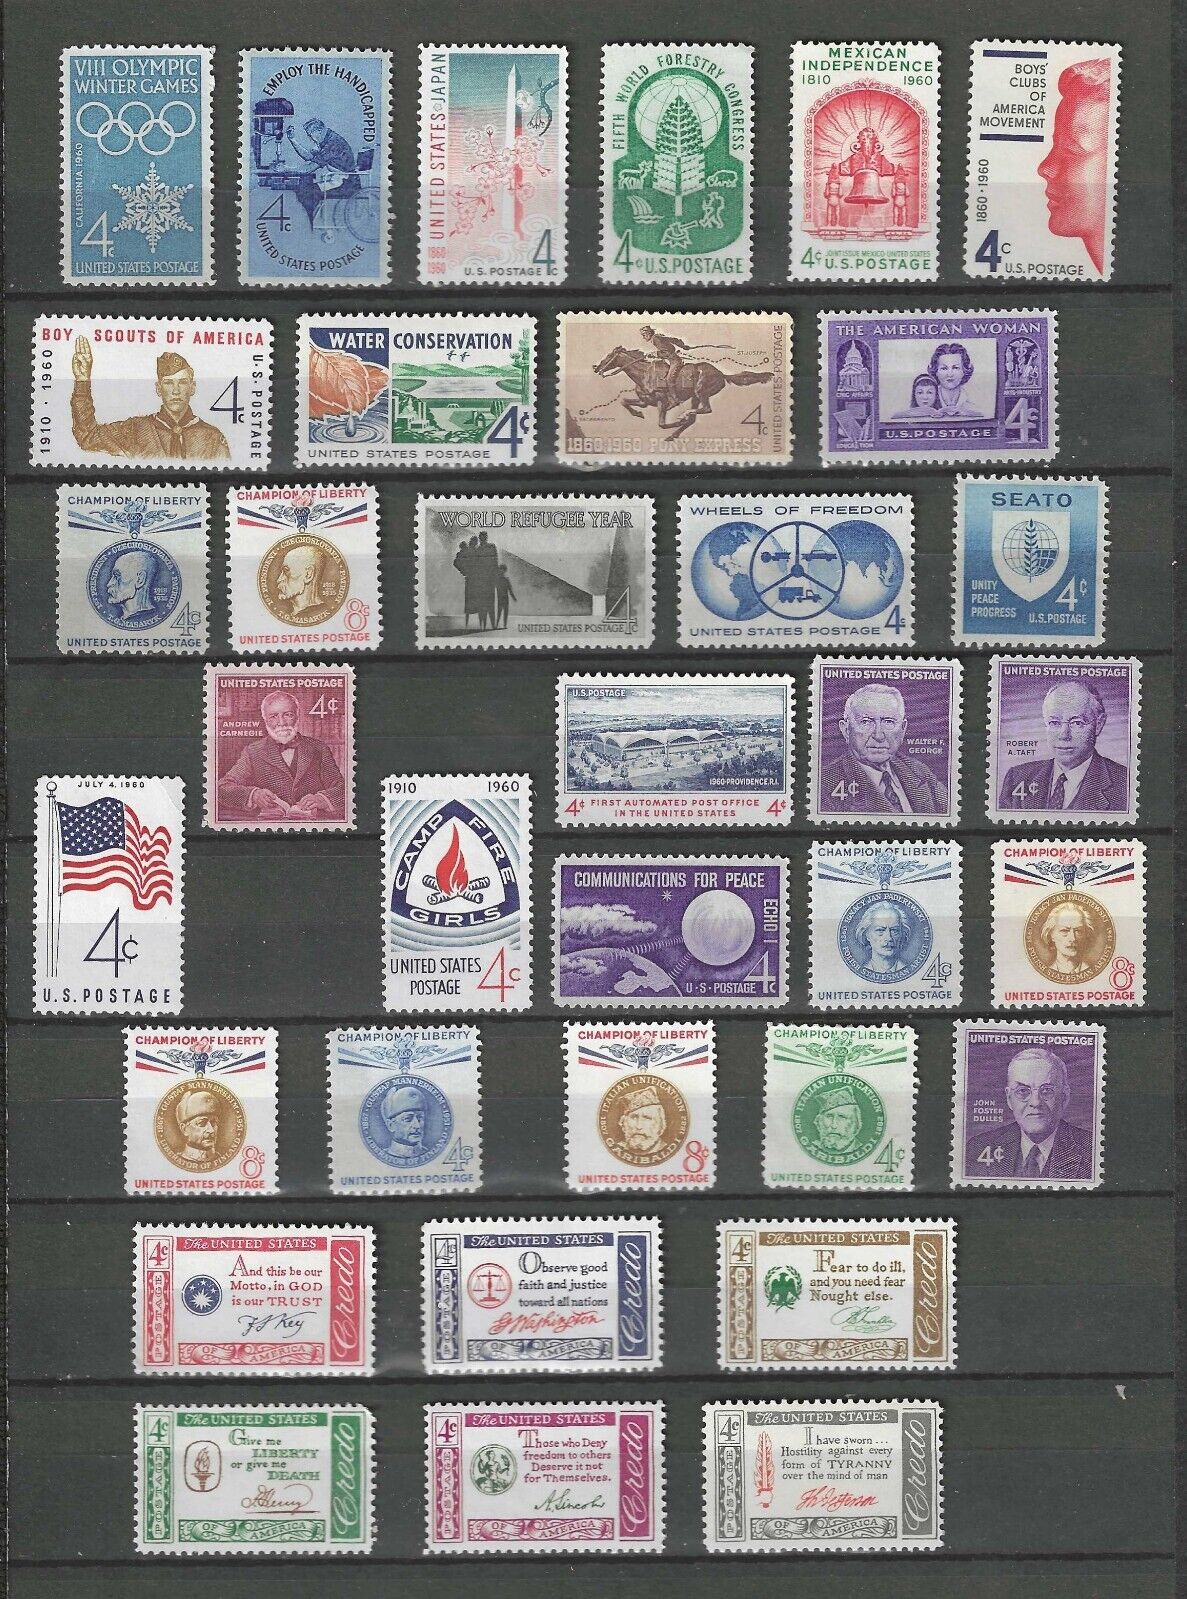 1960 US Year Set Mint Commemorative Postage Stamps SC #1139 - 1173